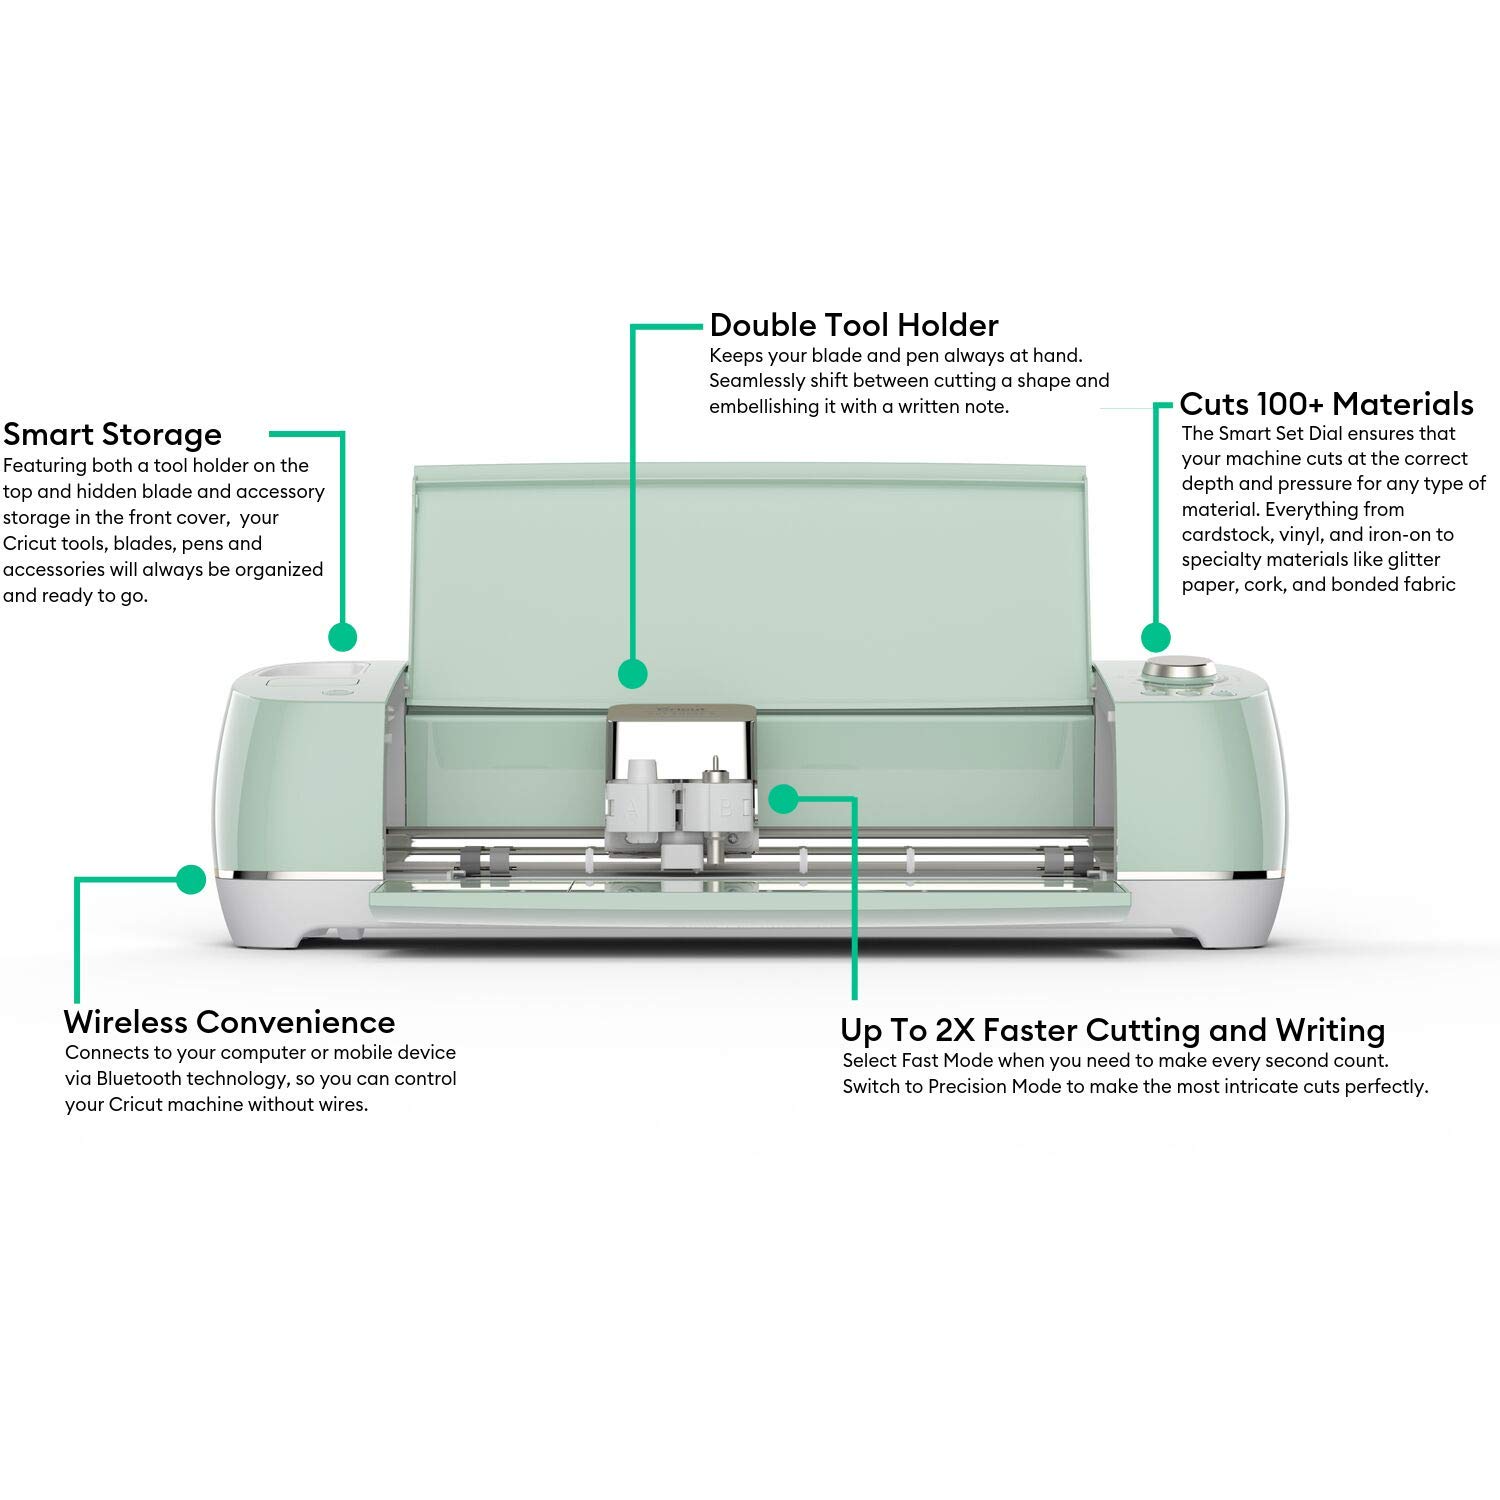 Cricut Explore Air 2 - A DIY Cutting Machine for all Crafts, Create Customized Cards, Home Decor & More, Bluetooth Connectivity, Compatible with iOS, Android, Windows & Mac, Mint